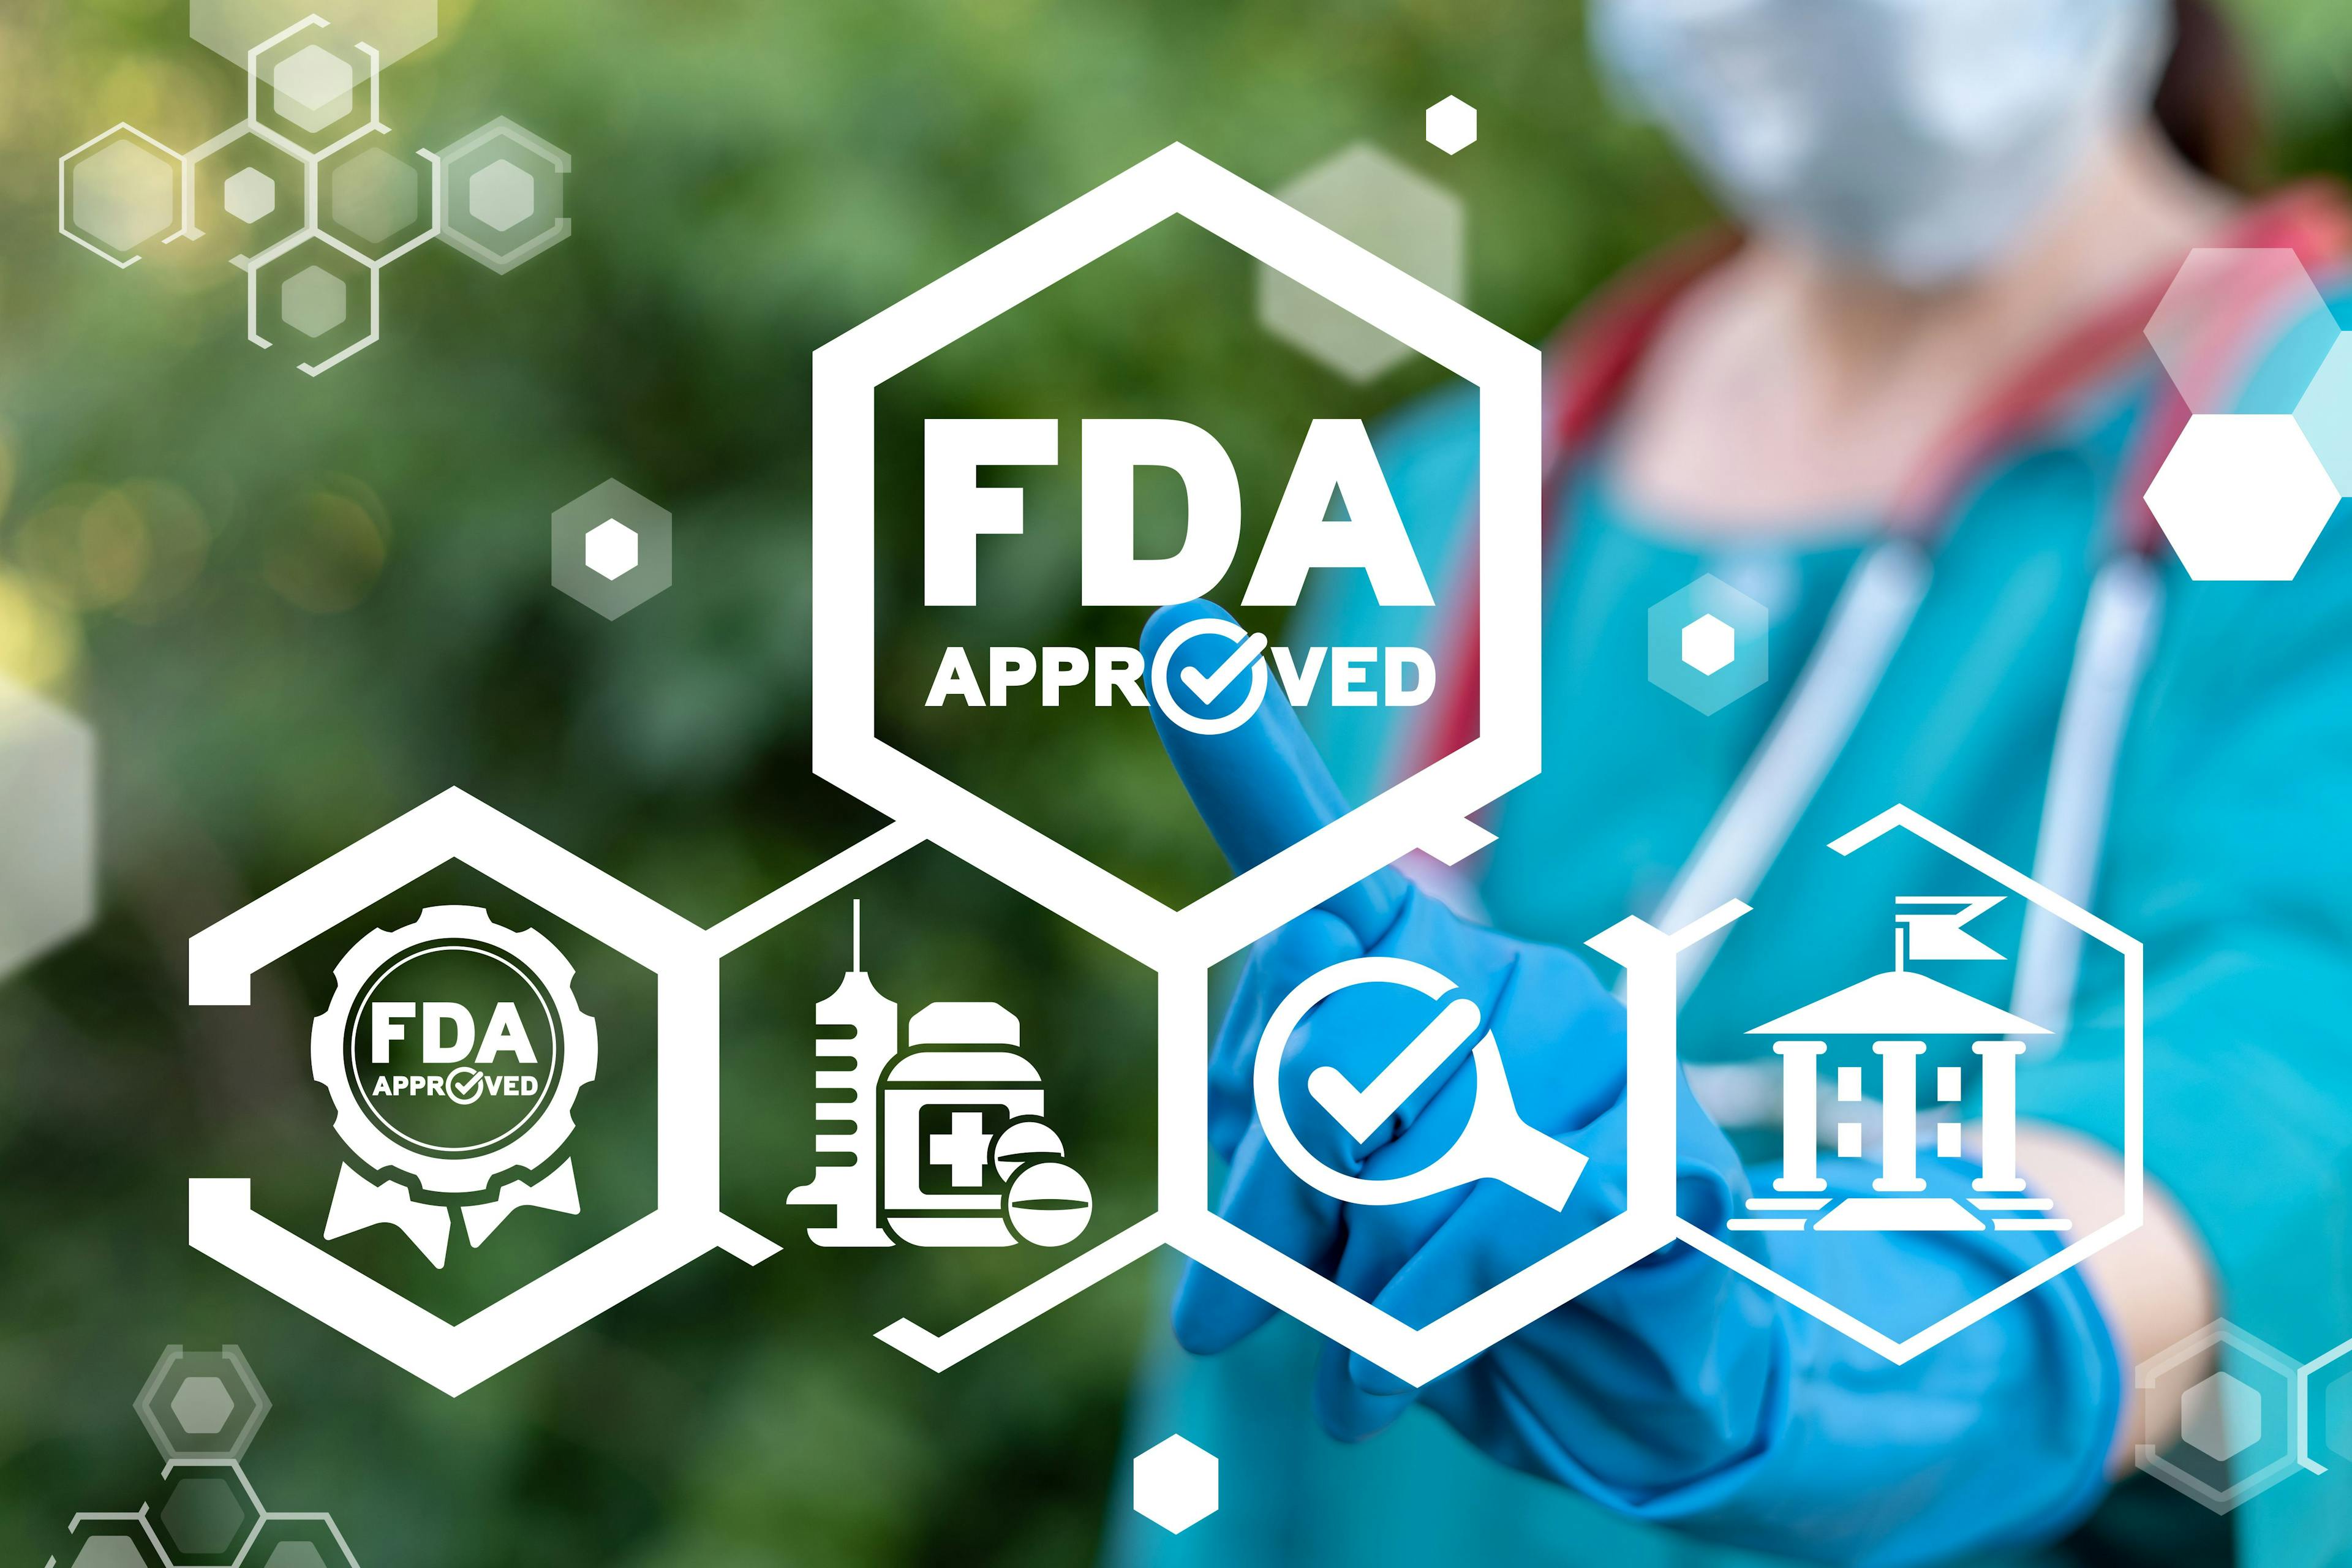 Medical concept of FDA approved. Food and drugs administration quality control.